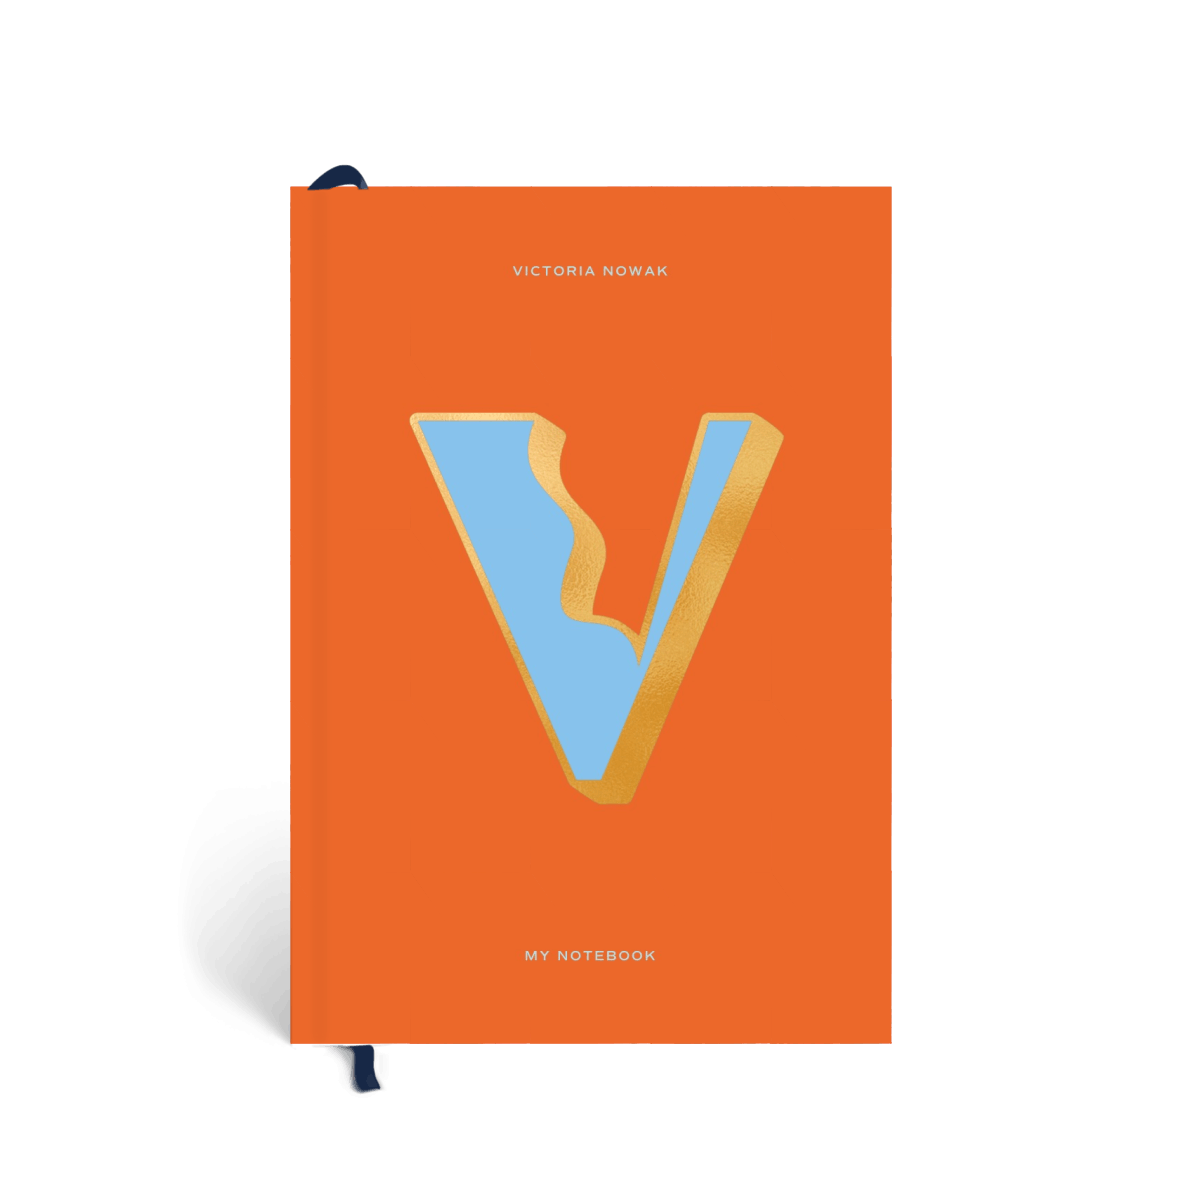 V is for...